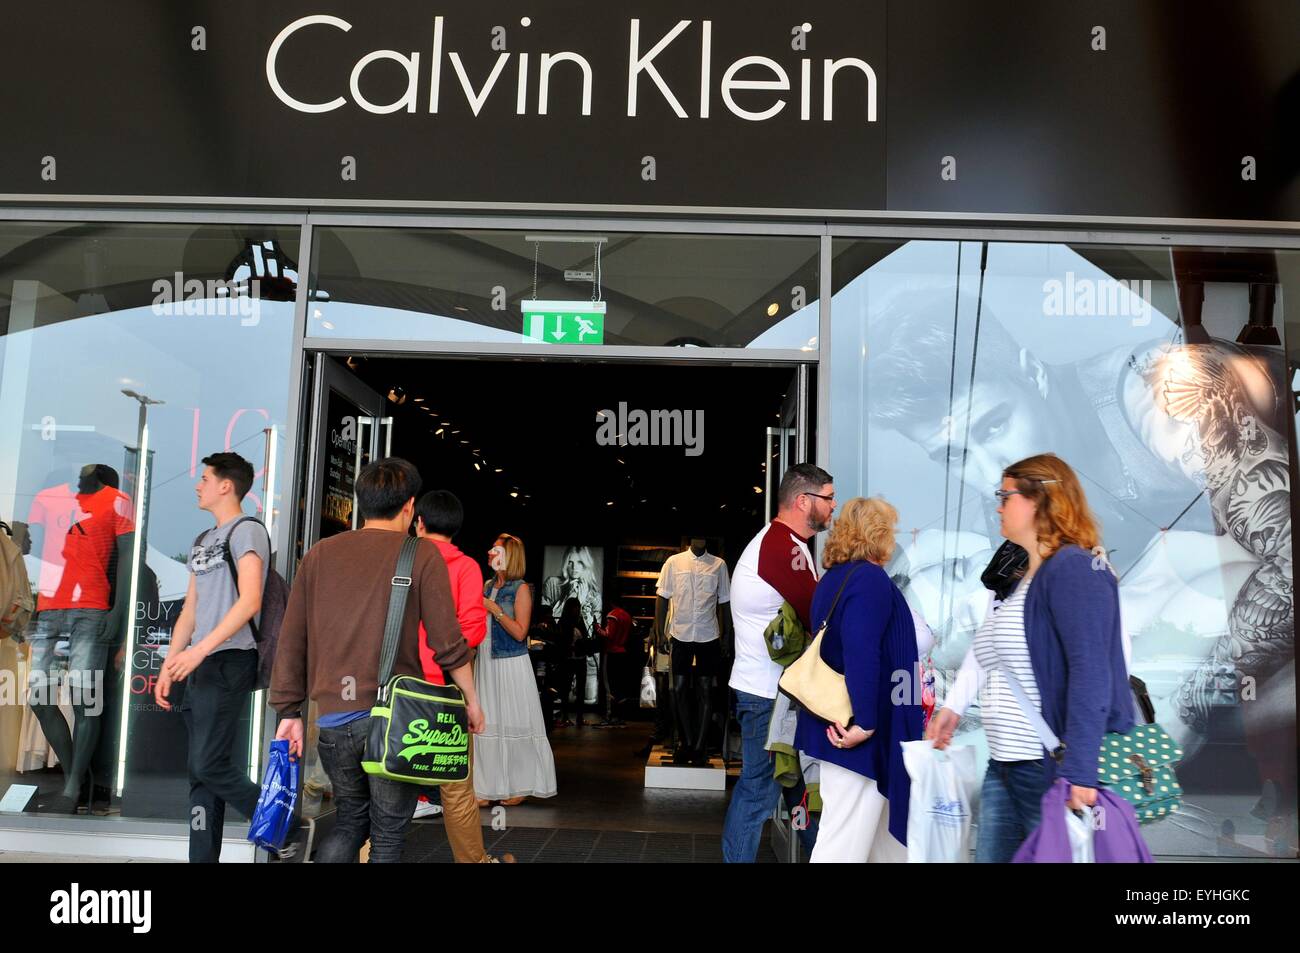 Calvin klein shop hi-res stock photography and images - Alamy